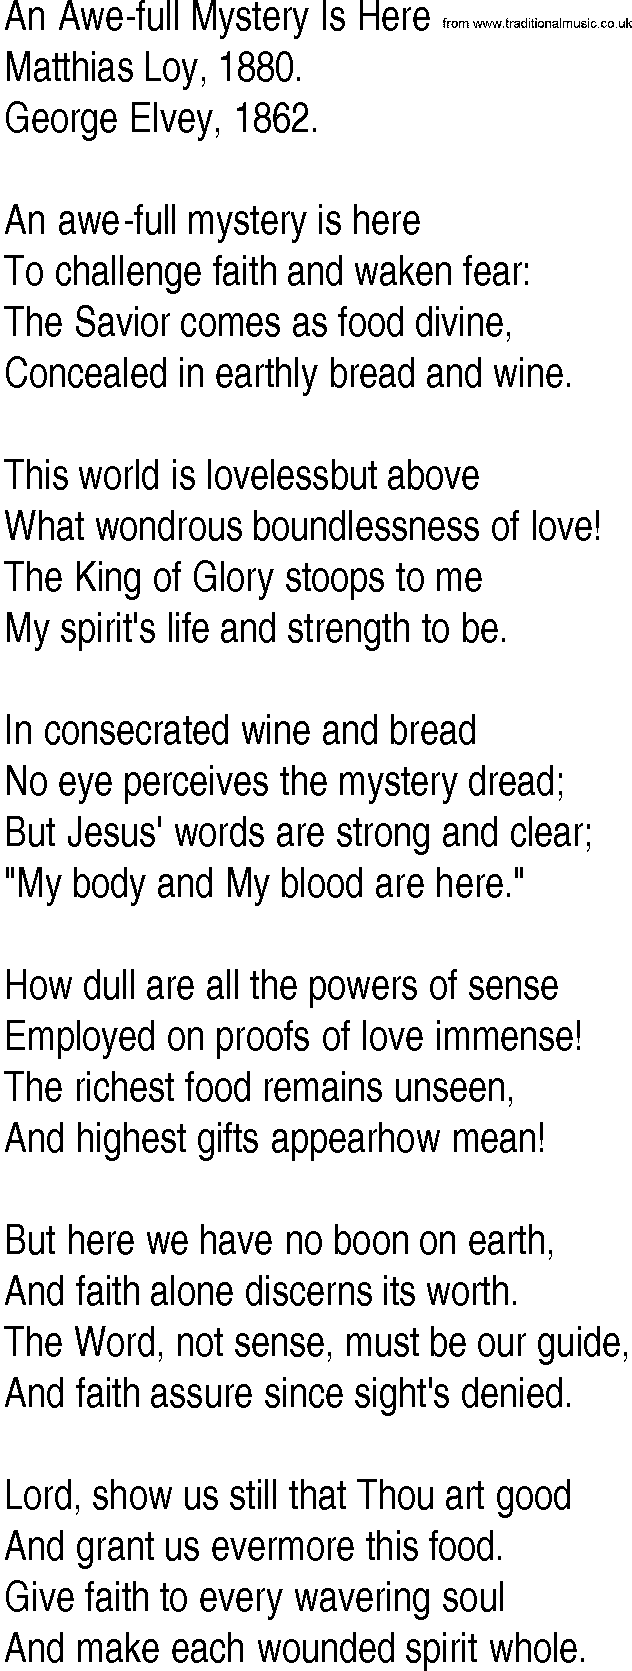 Hymn and Gospel Song: An Awe-full Mystery Is Here by Matthias Loy lyrics